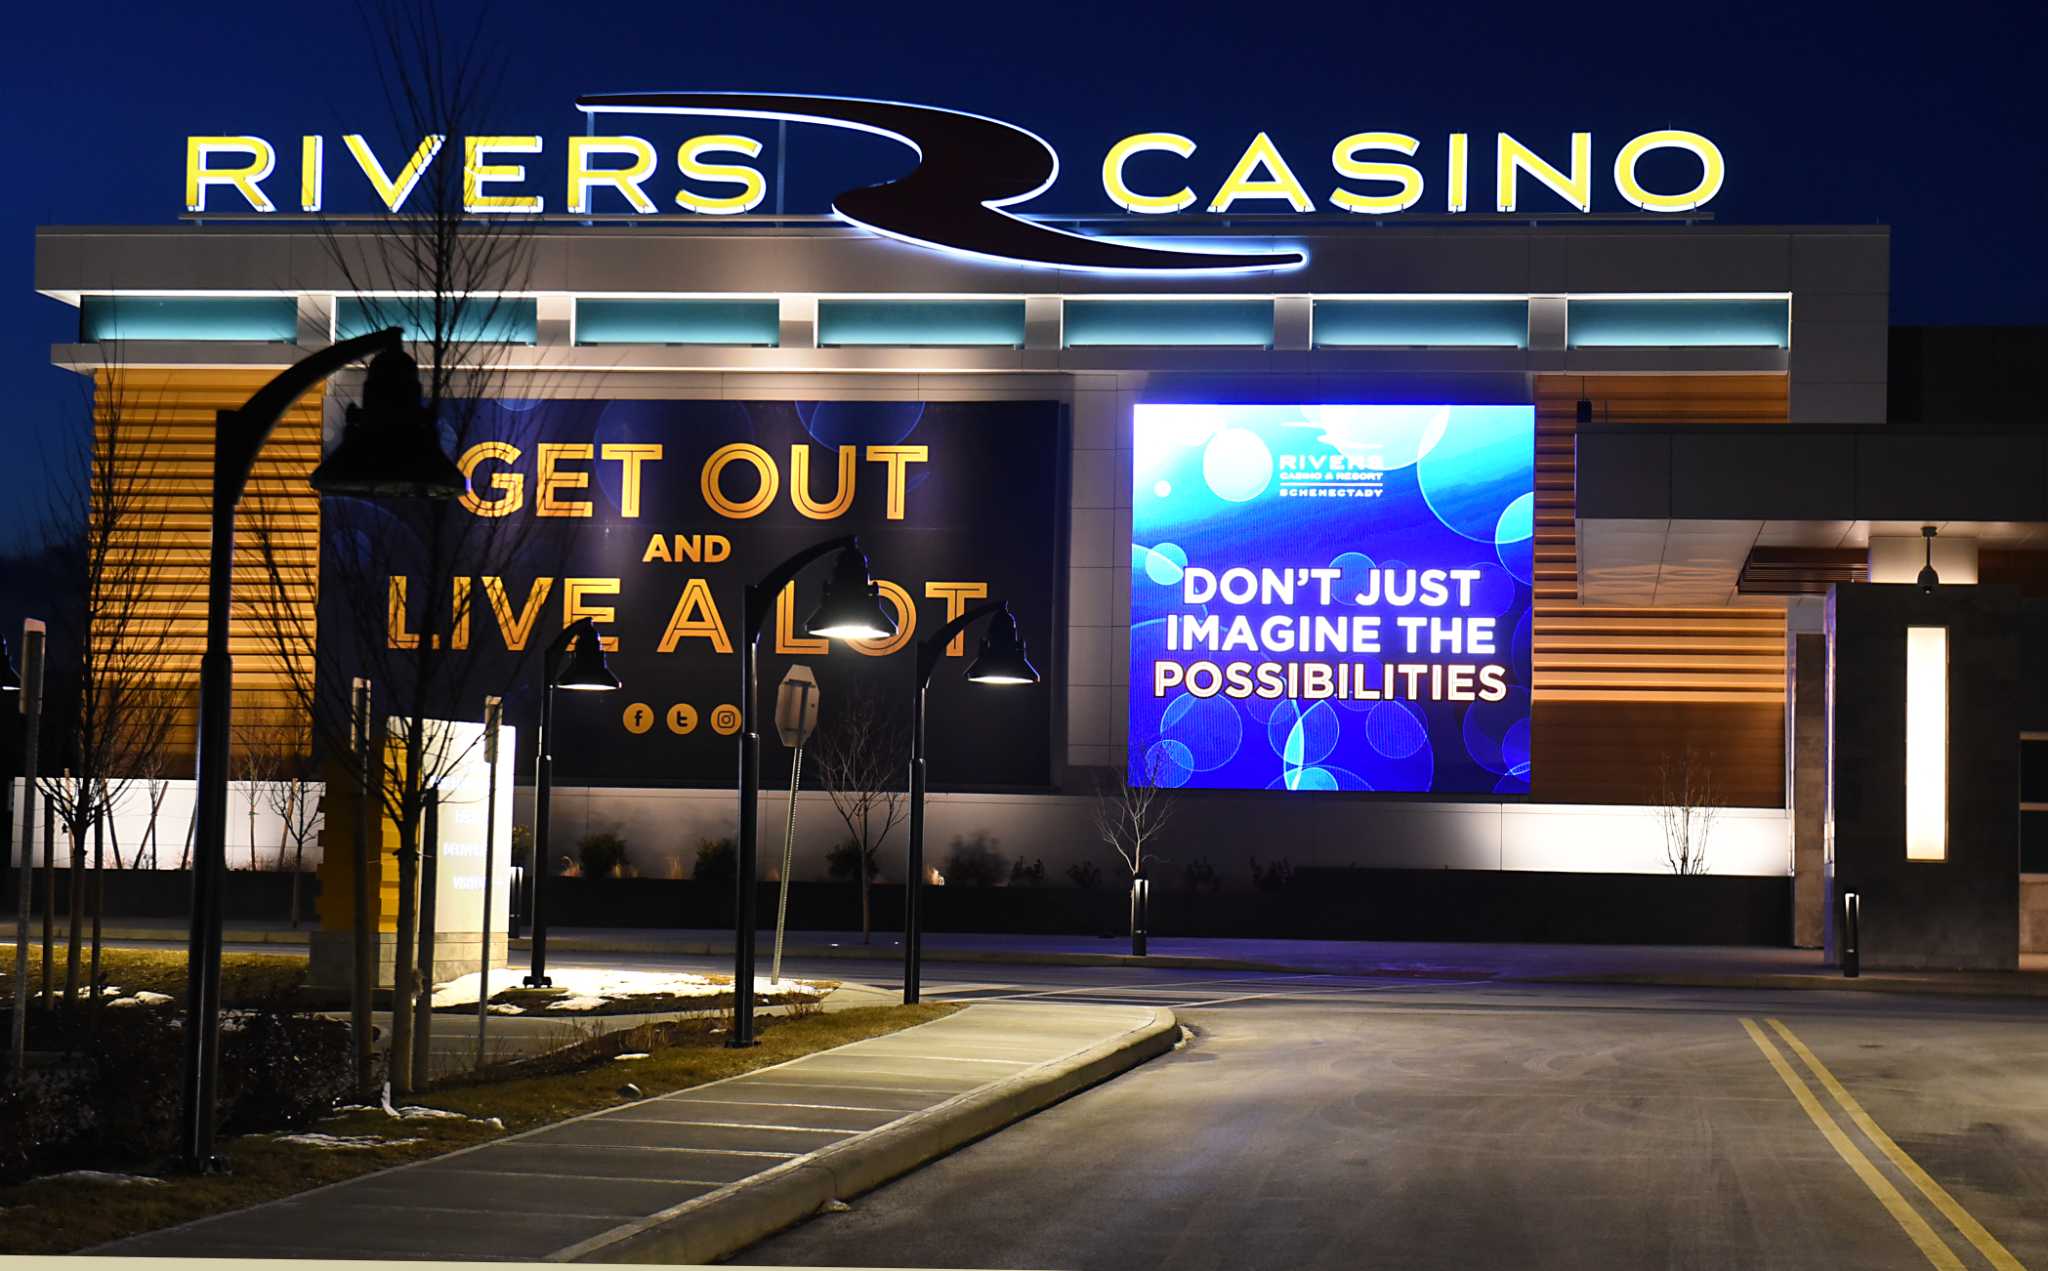 Job fair June 3 to fill 100 positions at Rivers Casino for new hotel